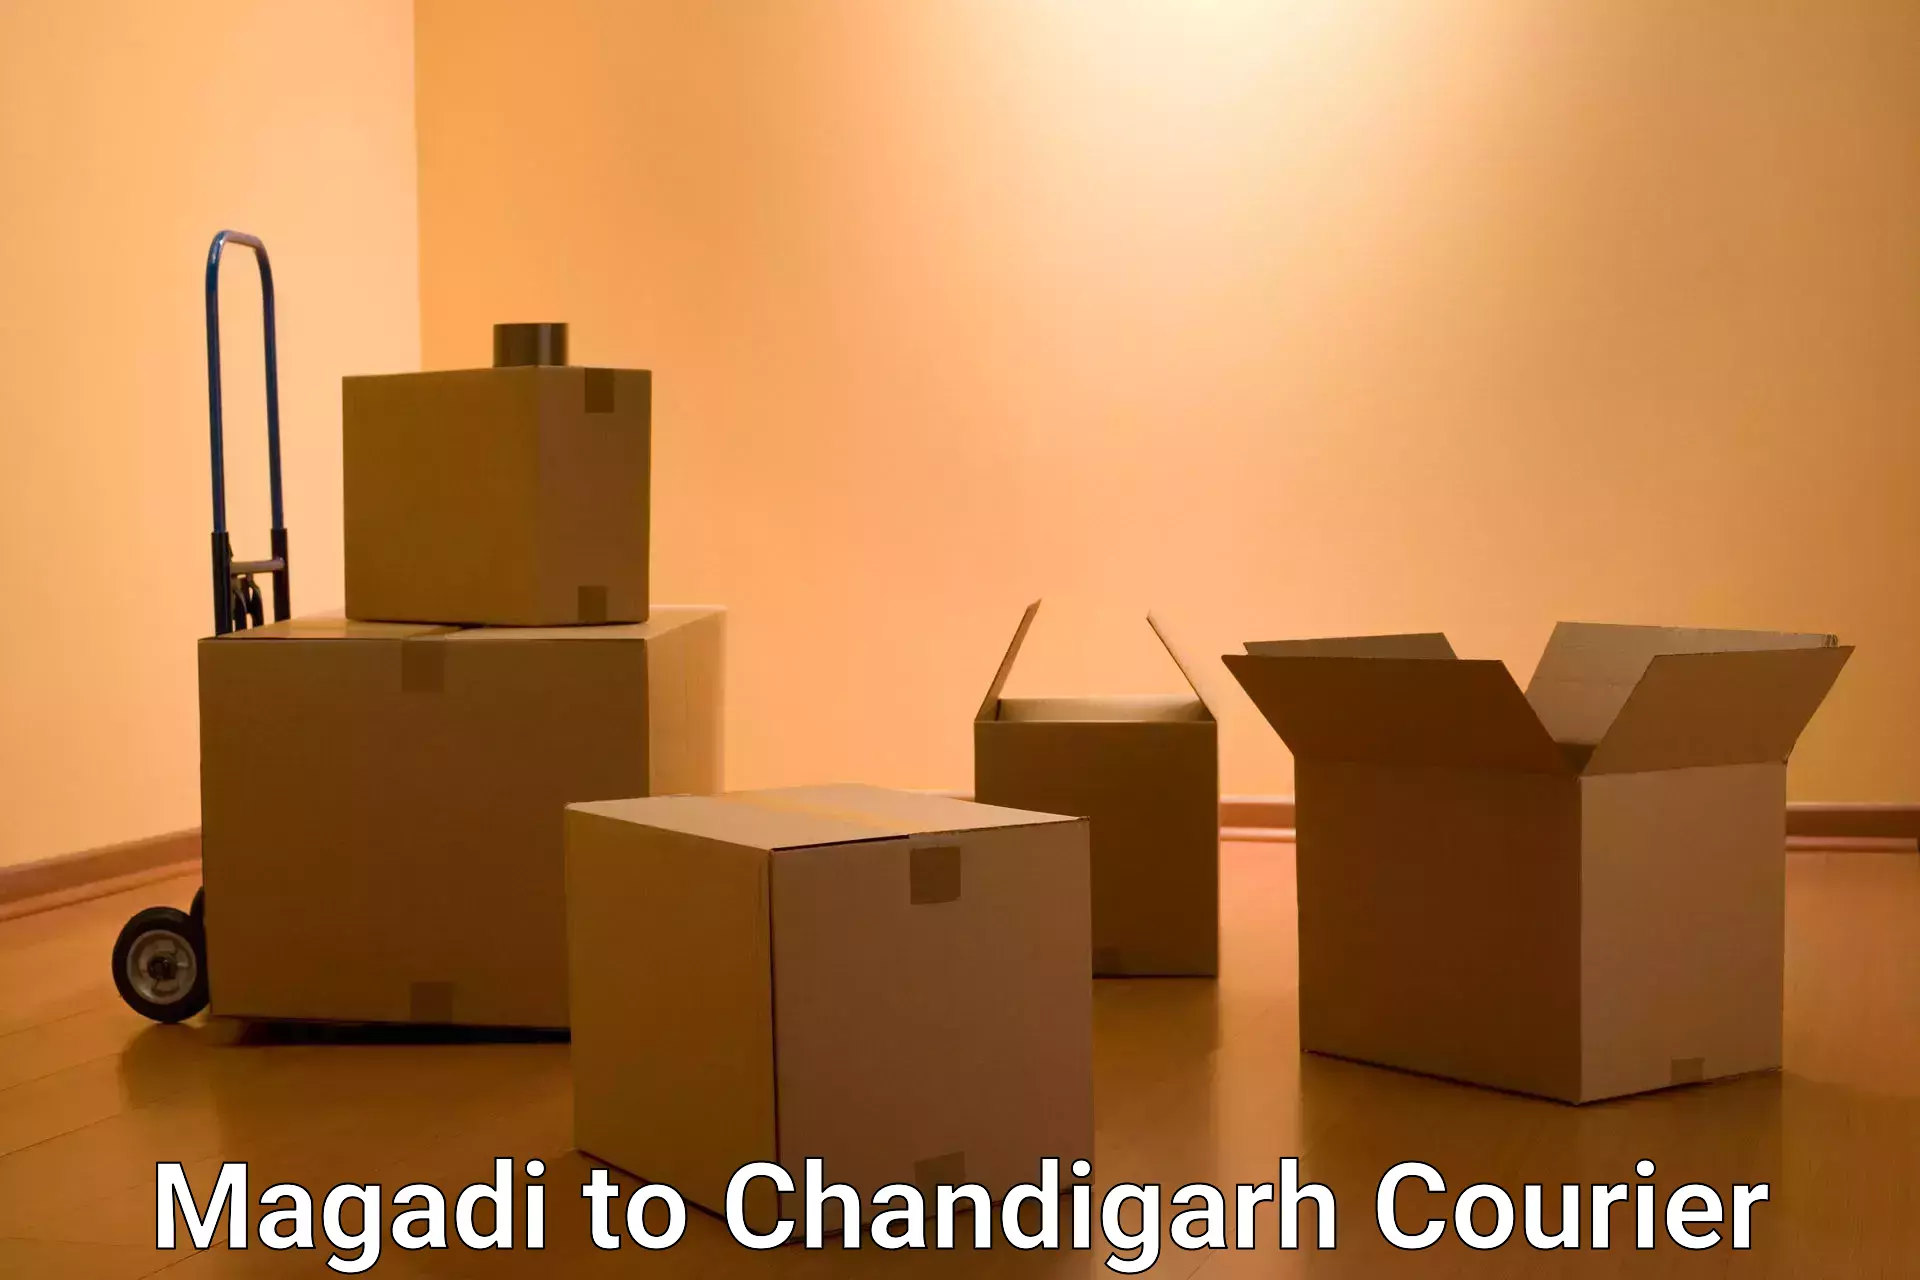 Ocean freight courier Magadi to Chandigarh